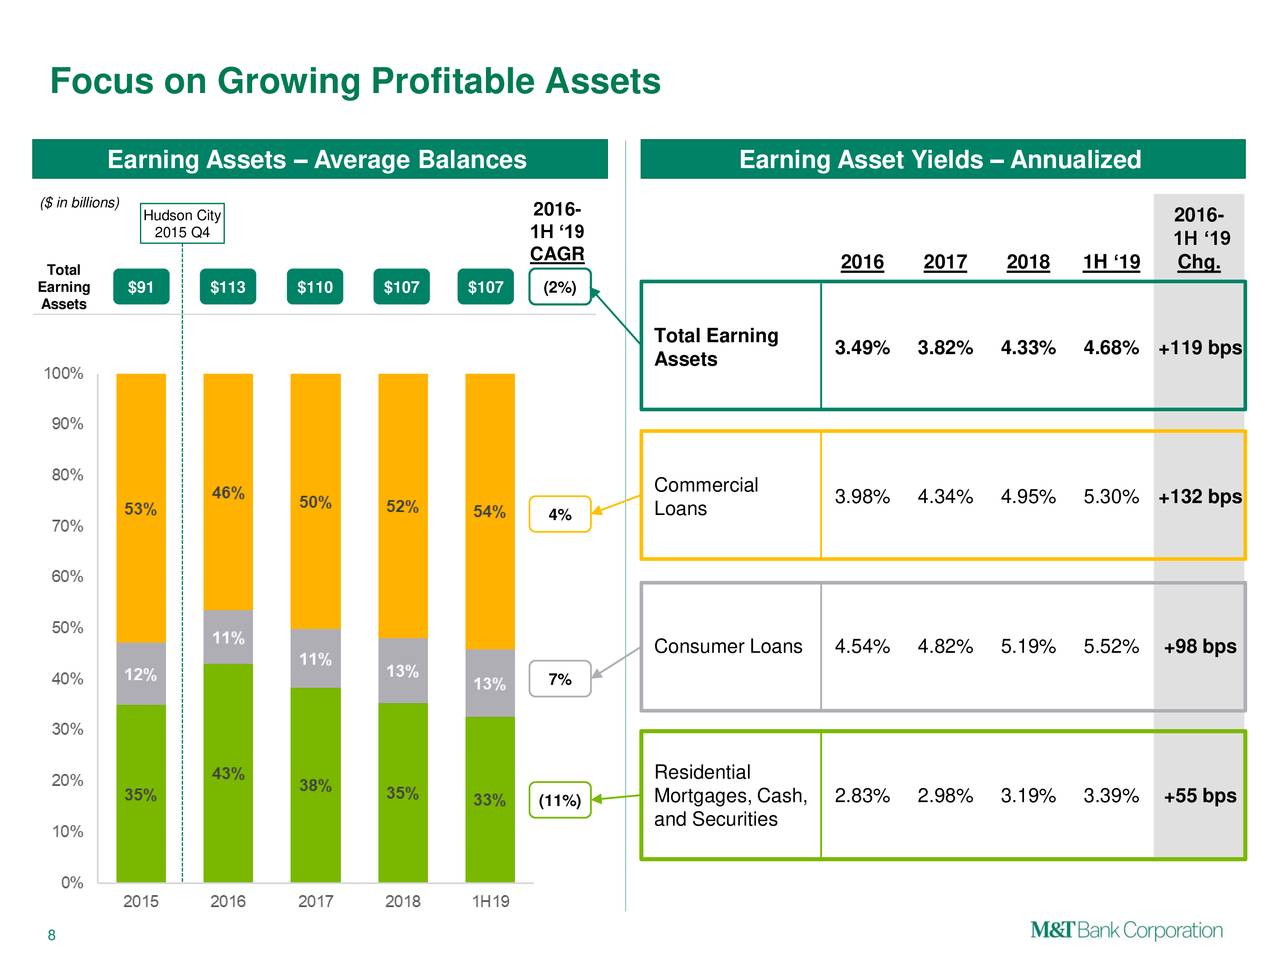 Focus on Growing Profitable Assets